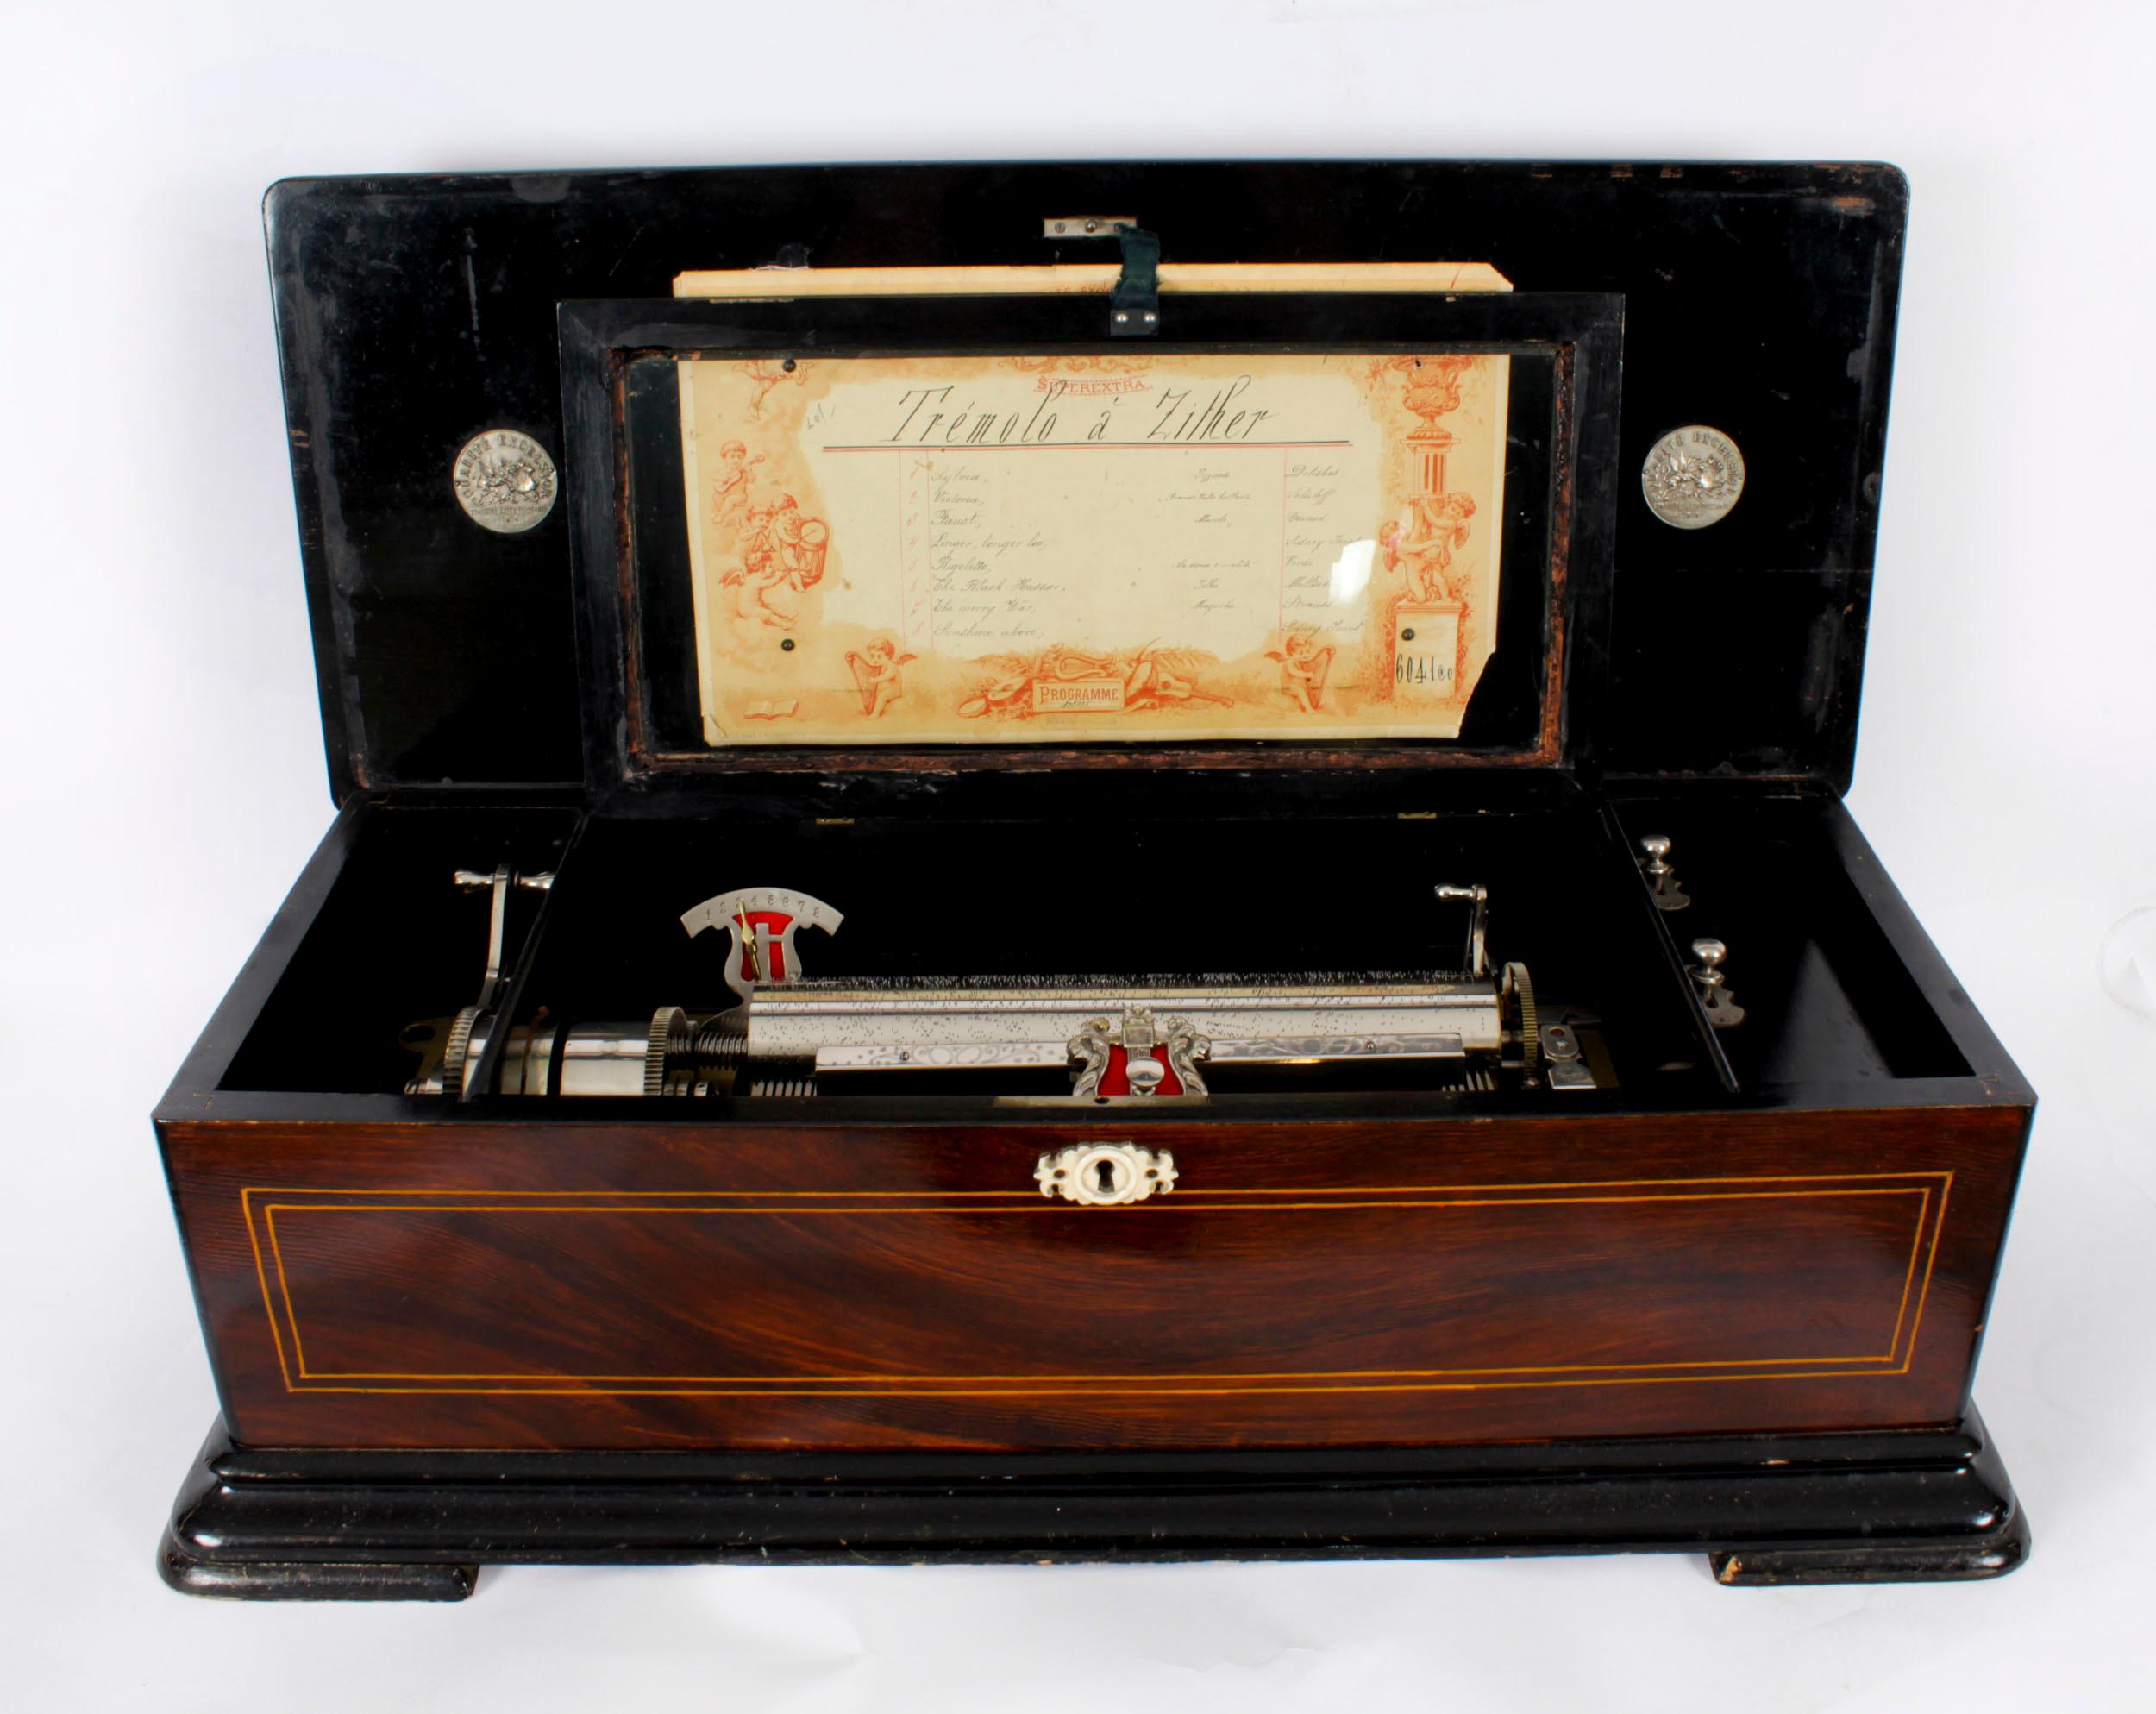 This is  a lovely antique Swiss 8 airs Gonçalo Alves cylinder music box, manufactured by Qualite Excelsior Sondrite Extra Puissant Harmonie, circa 1870 in date. 
 
The Goncalo Alves case is inlaid and crossbanded with boxwood inlay and superb